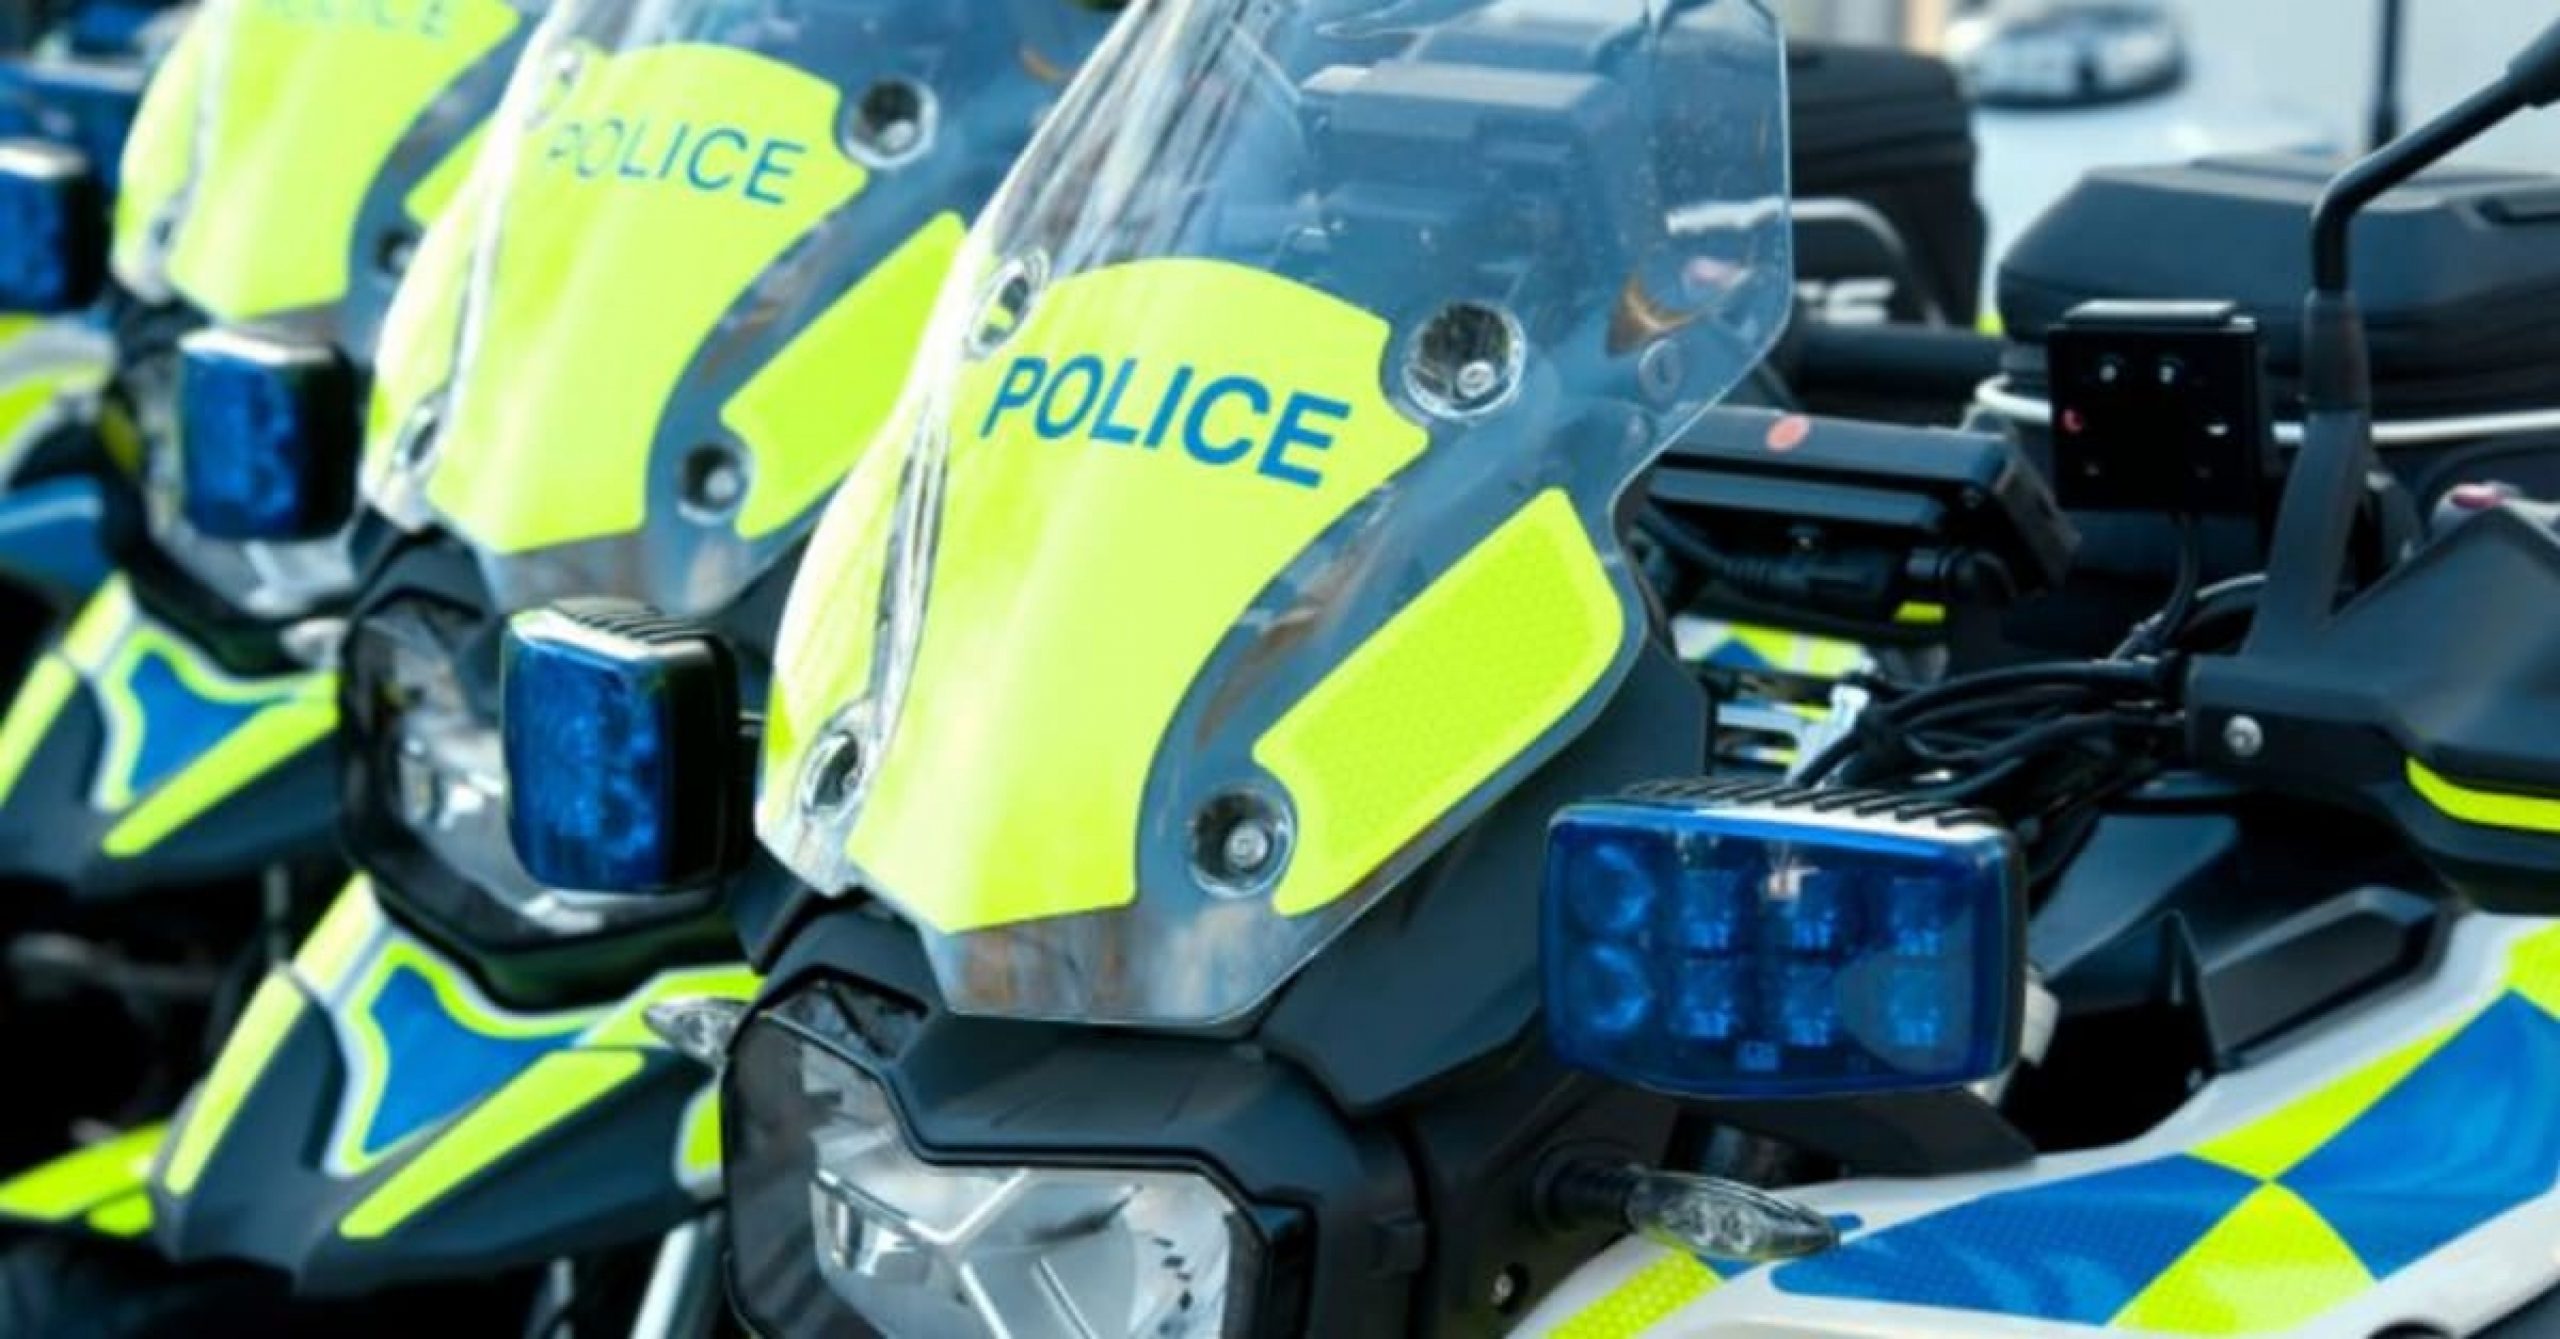 Appeal after motorcyclist seriously injured in Maida Vale